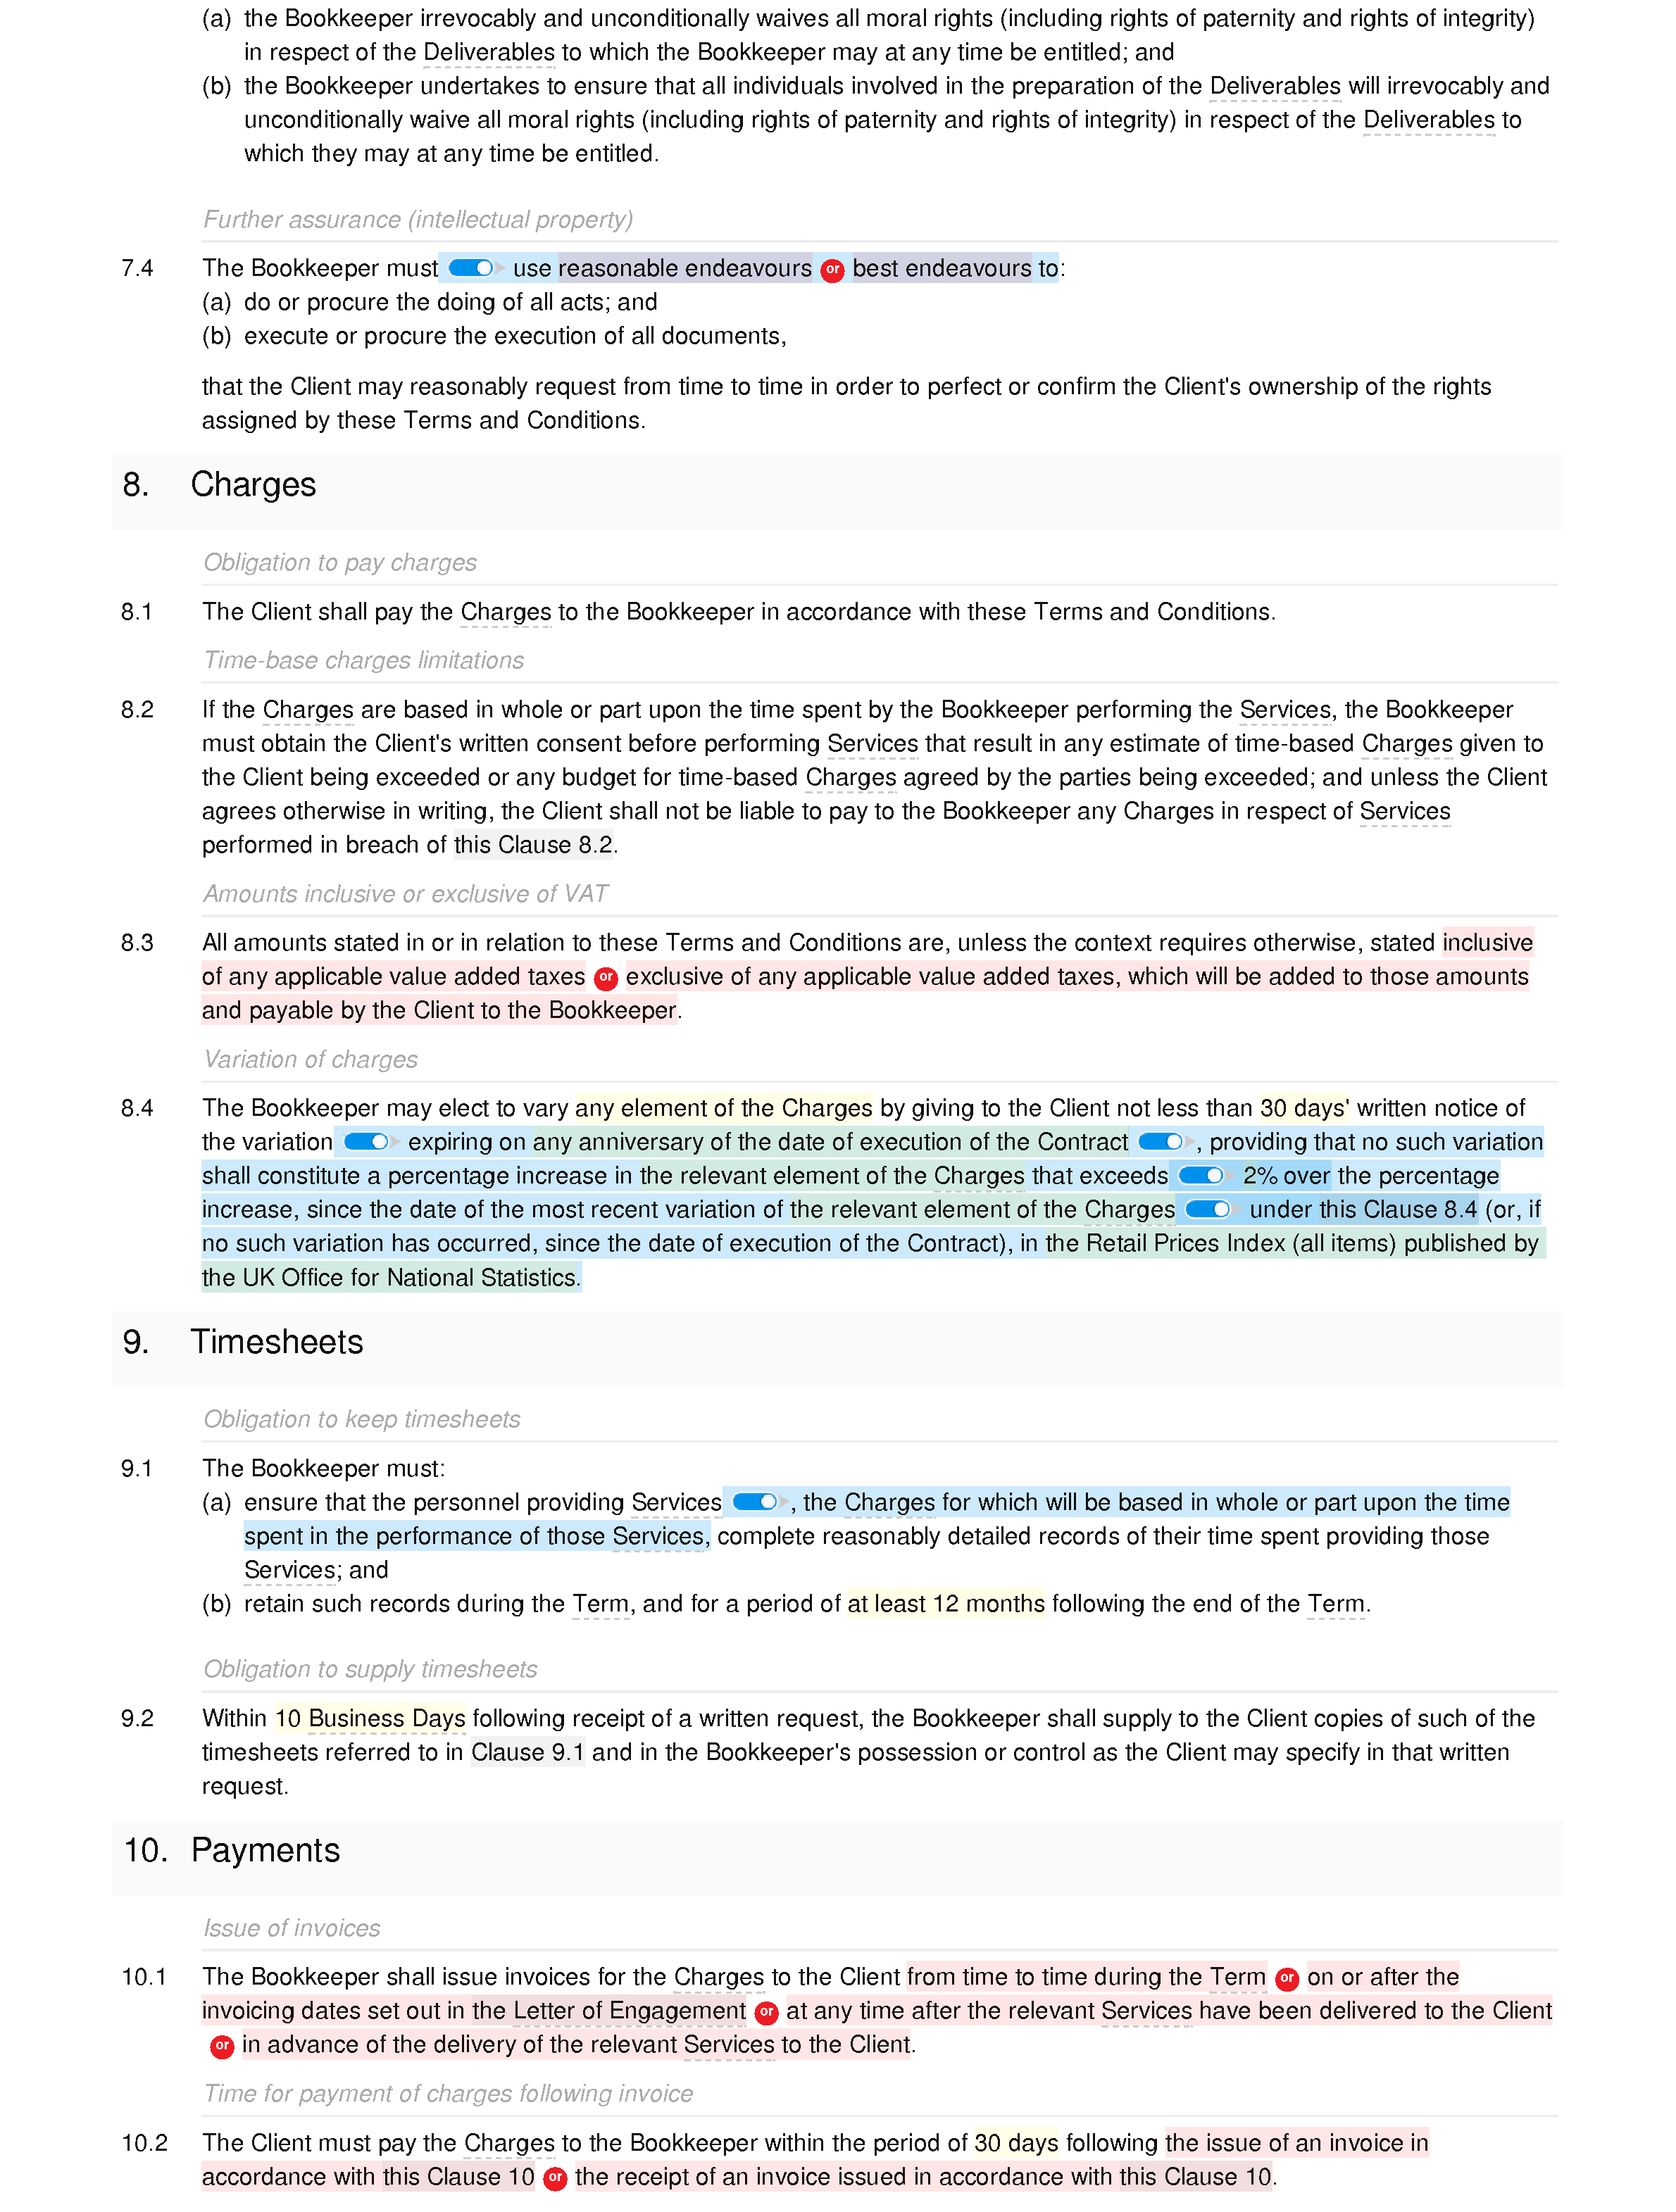 Bookkeeping terms and conditions document editor preview